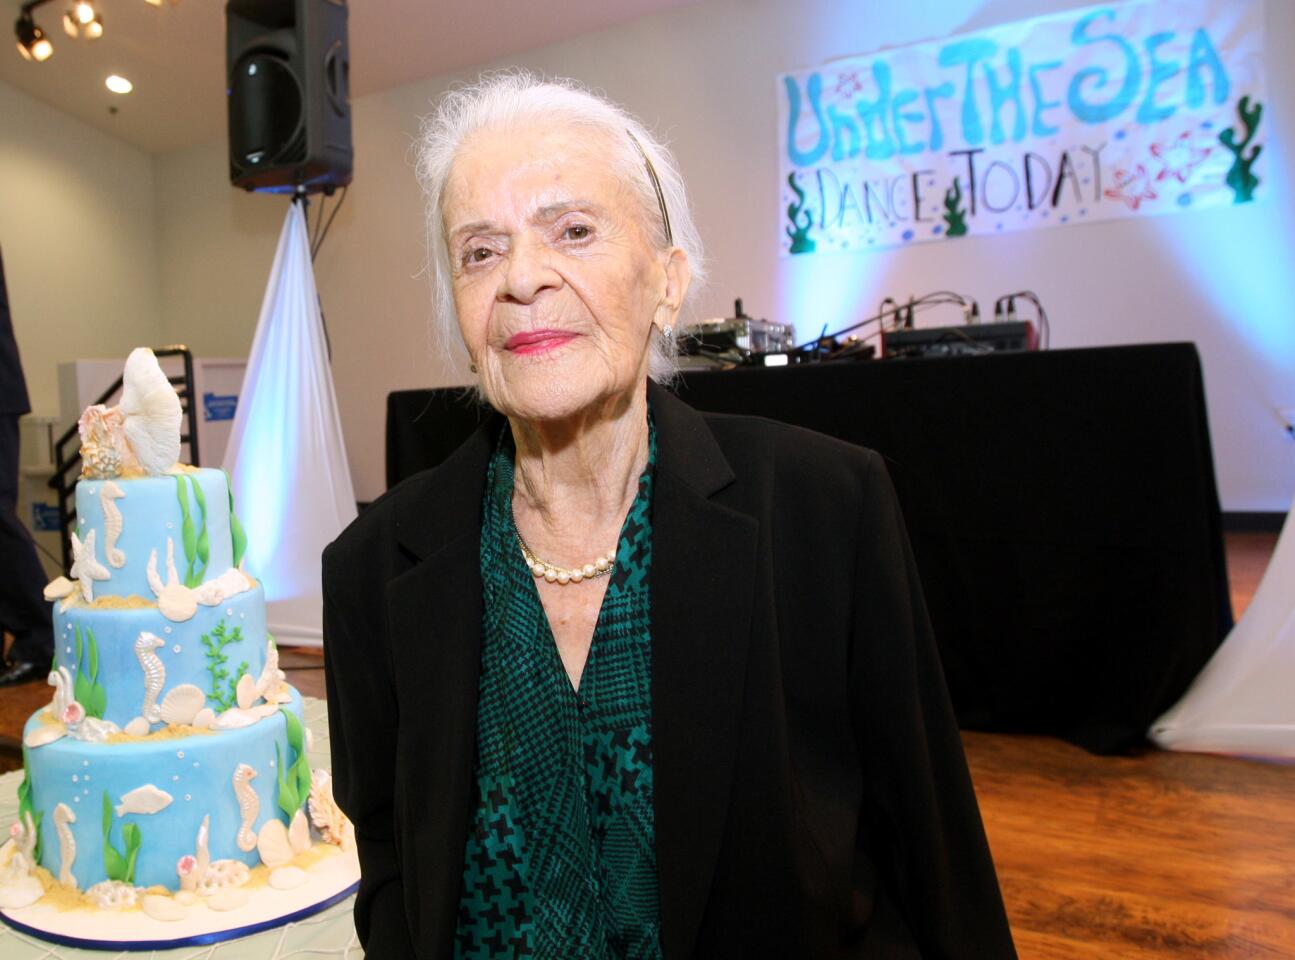 Gloria Aguirre, 92 of Glendale, poses in front of a large birthday cake during party for 90-year olds at the Adult Recreation Center in Glendale on Thursday, May 19, 2016.